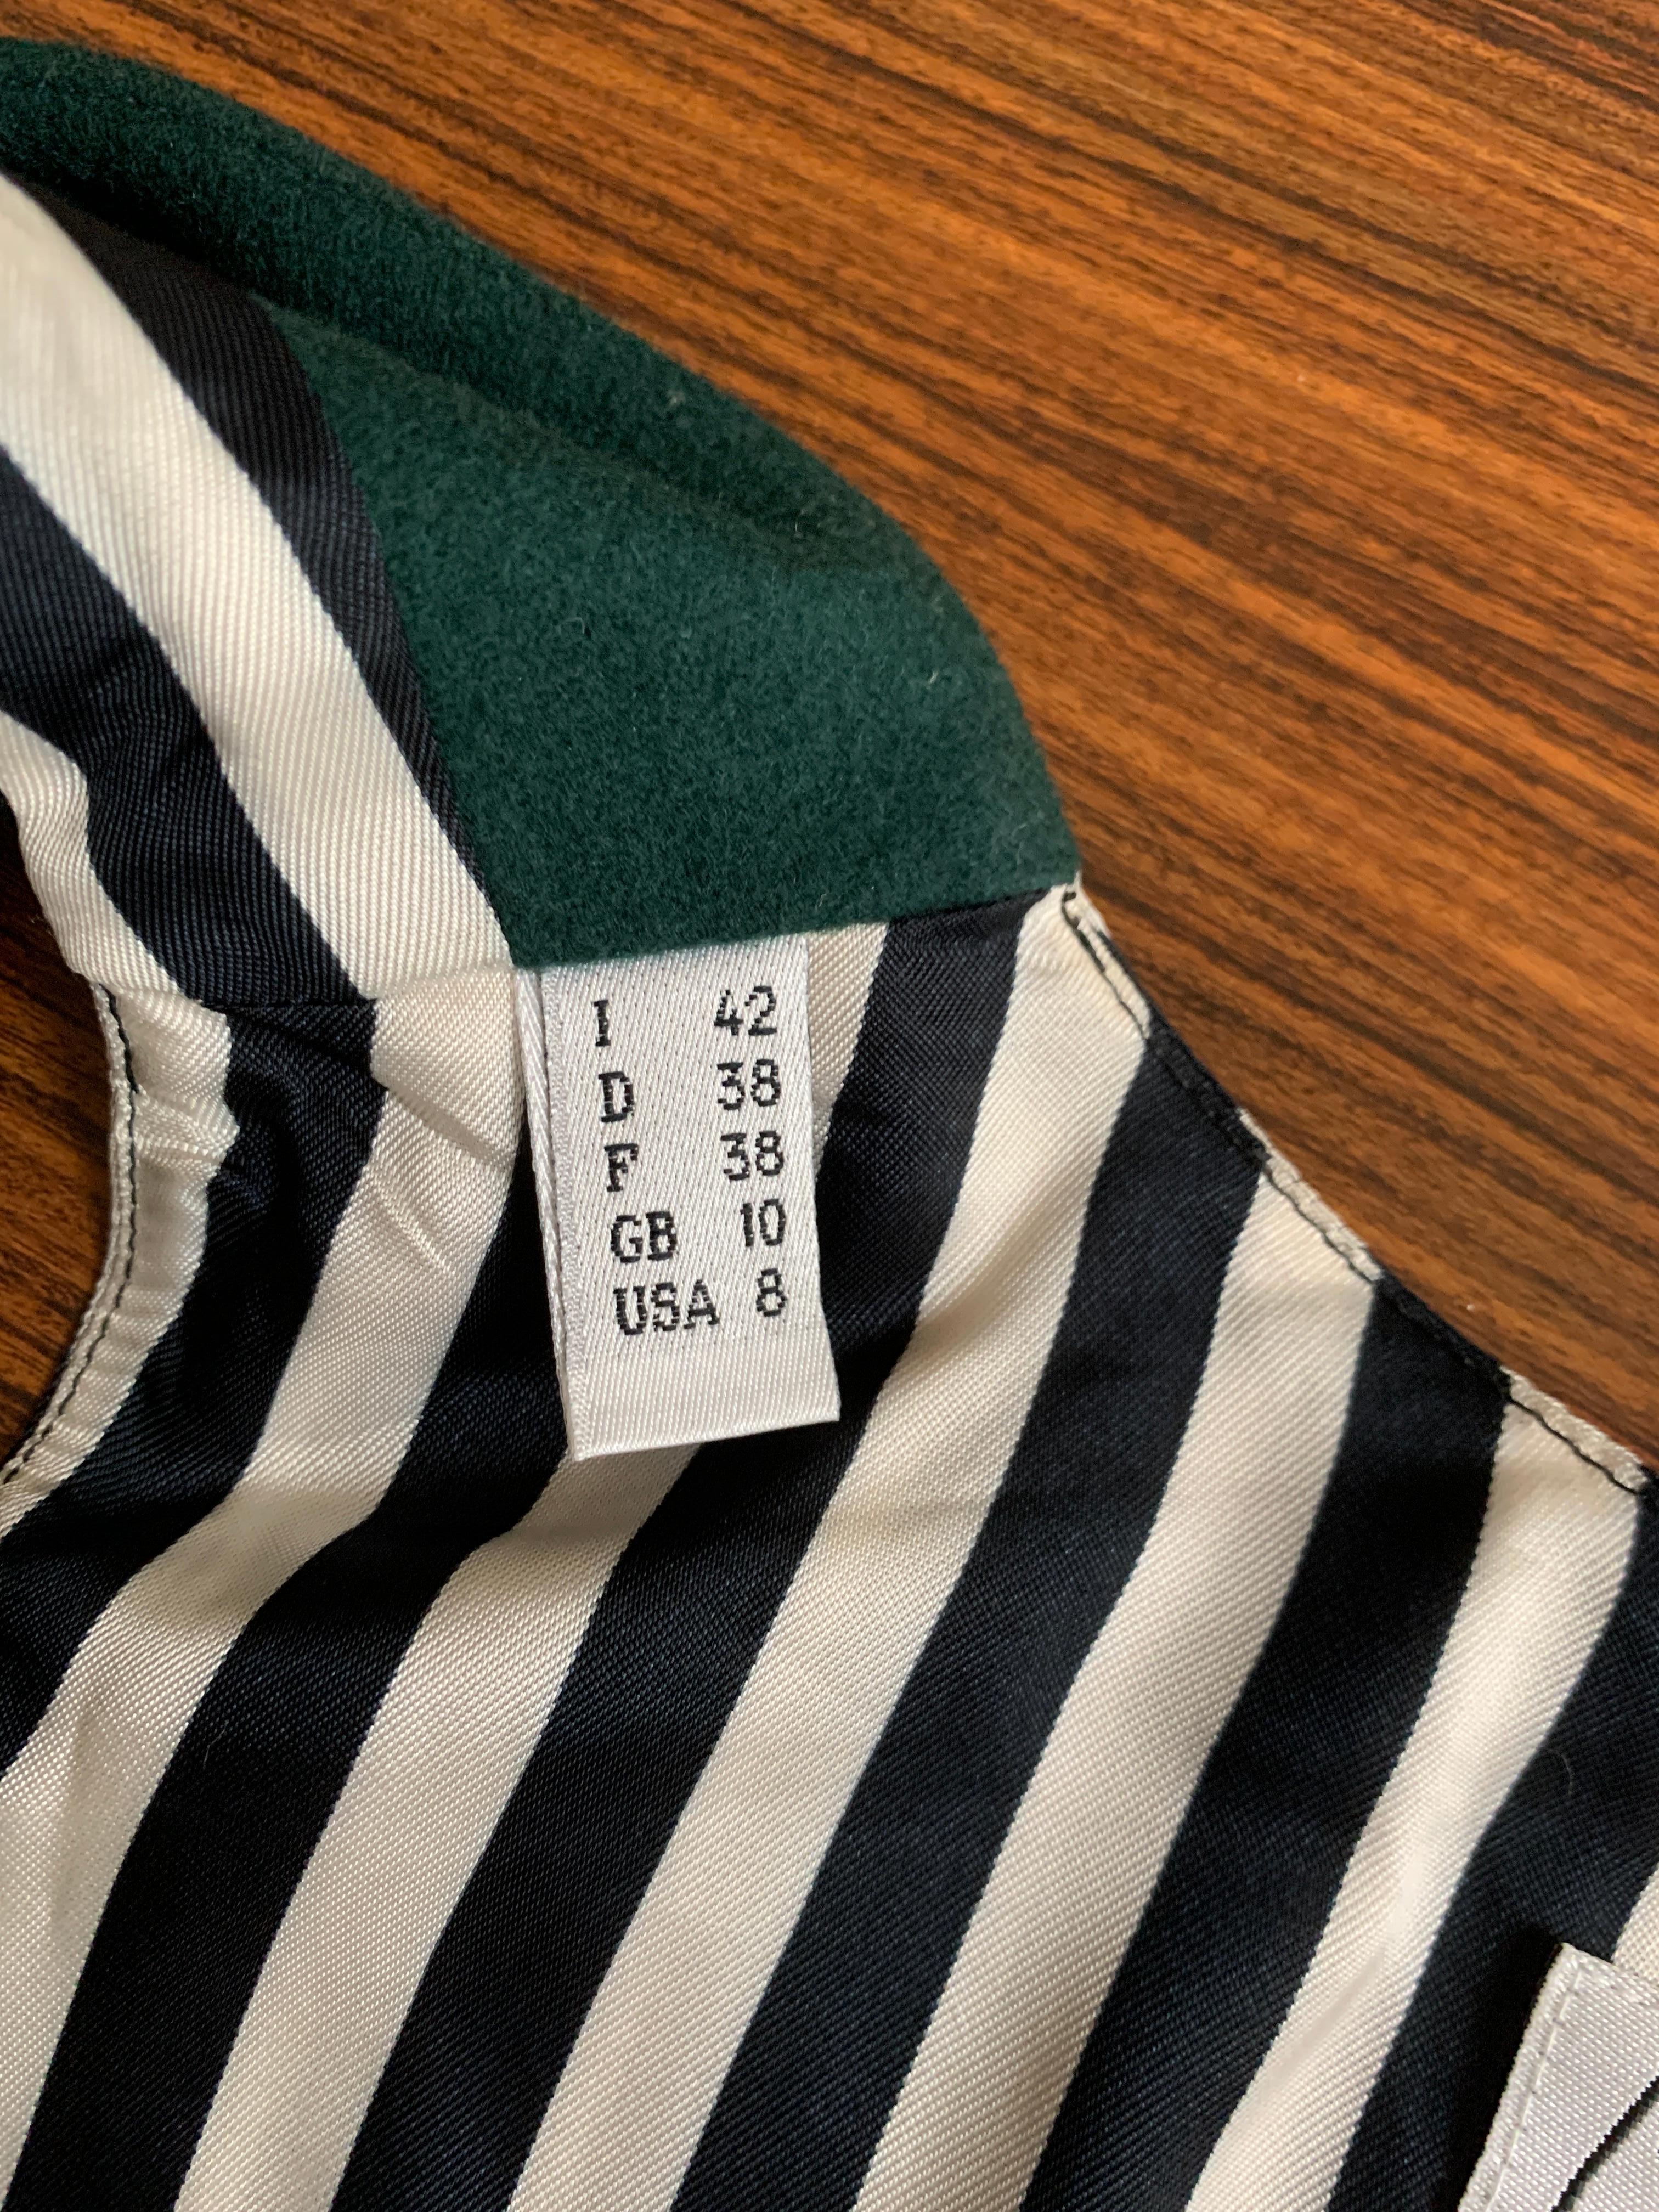 Moschino Cheap & Chic 1990s Smile and Frown Face Vest Green with Stripe Back In Excellent Condition For Sale In San Francisco, CA